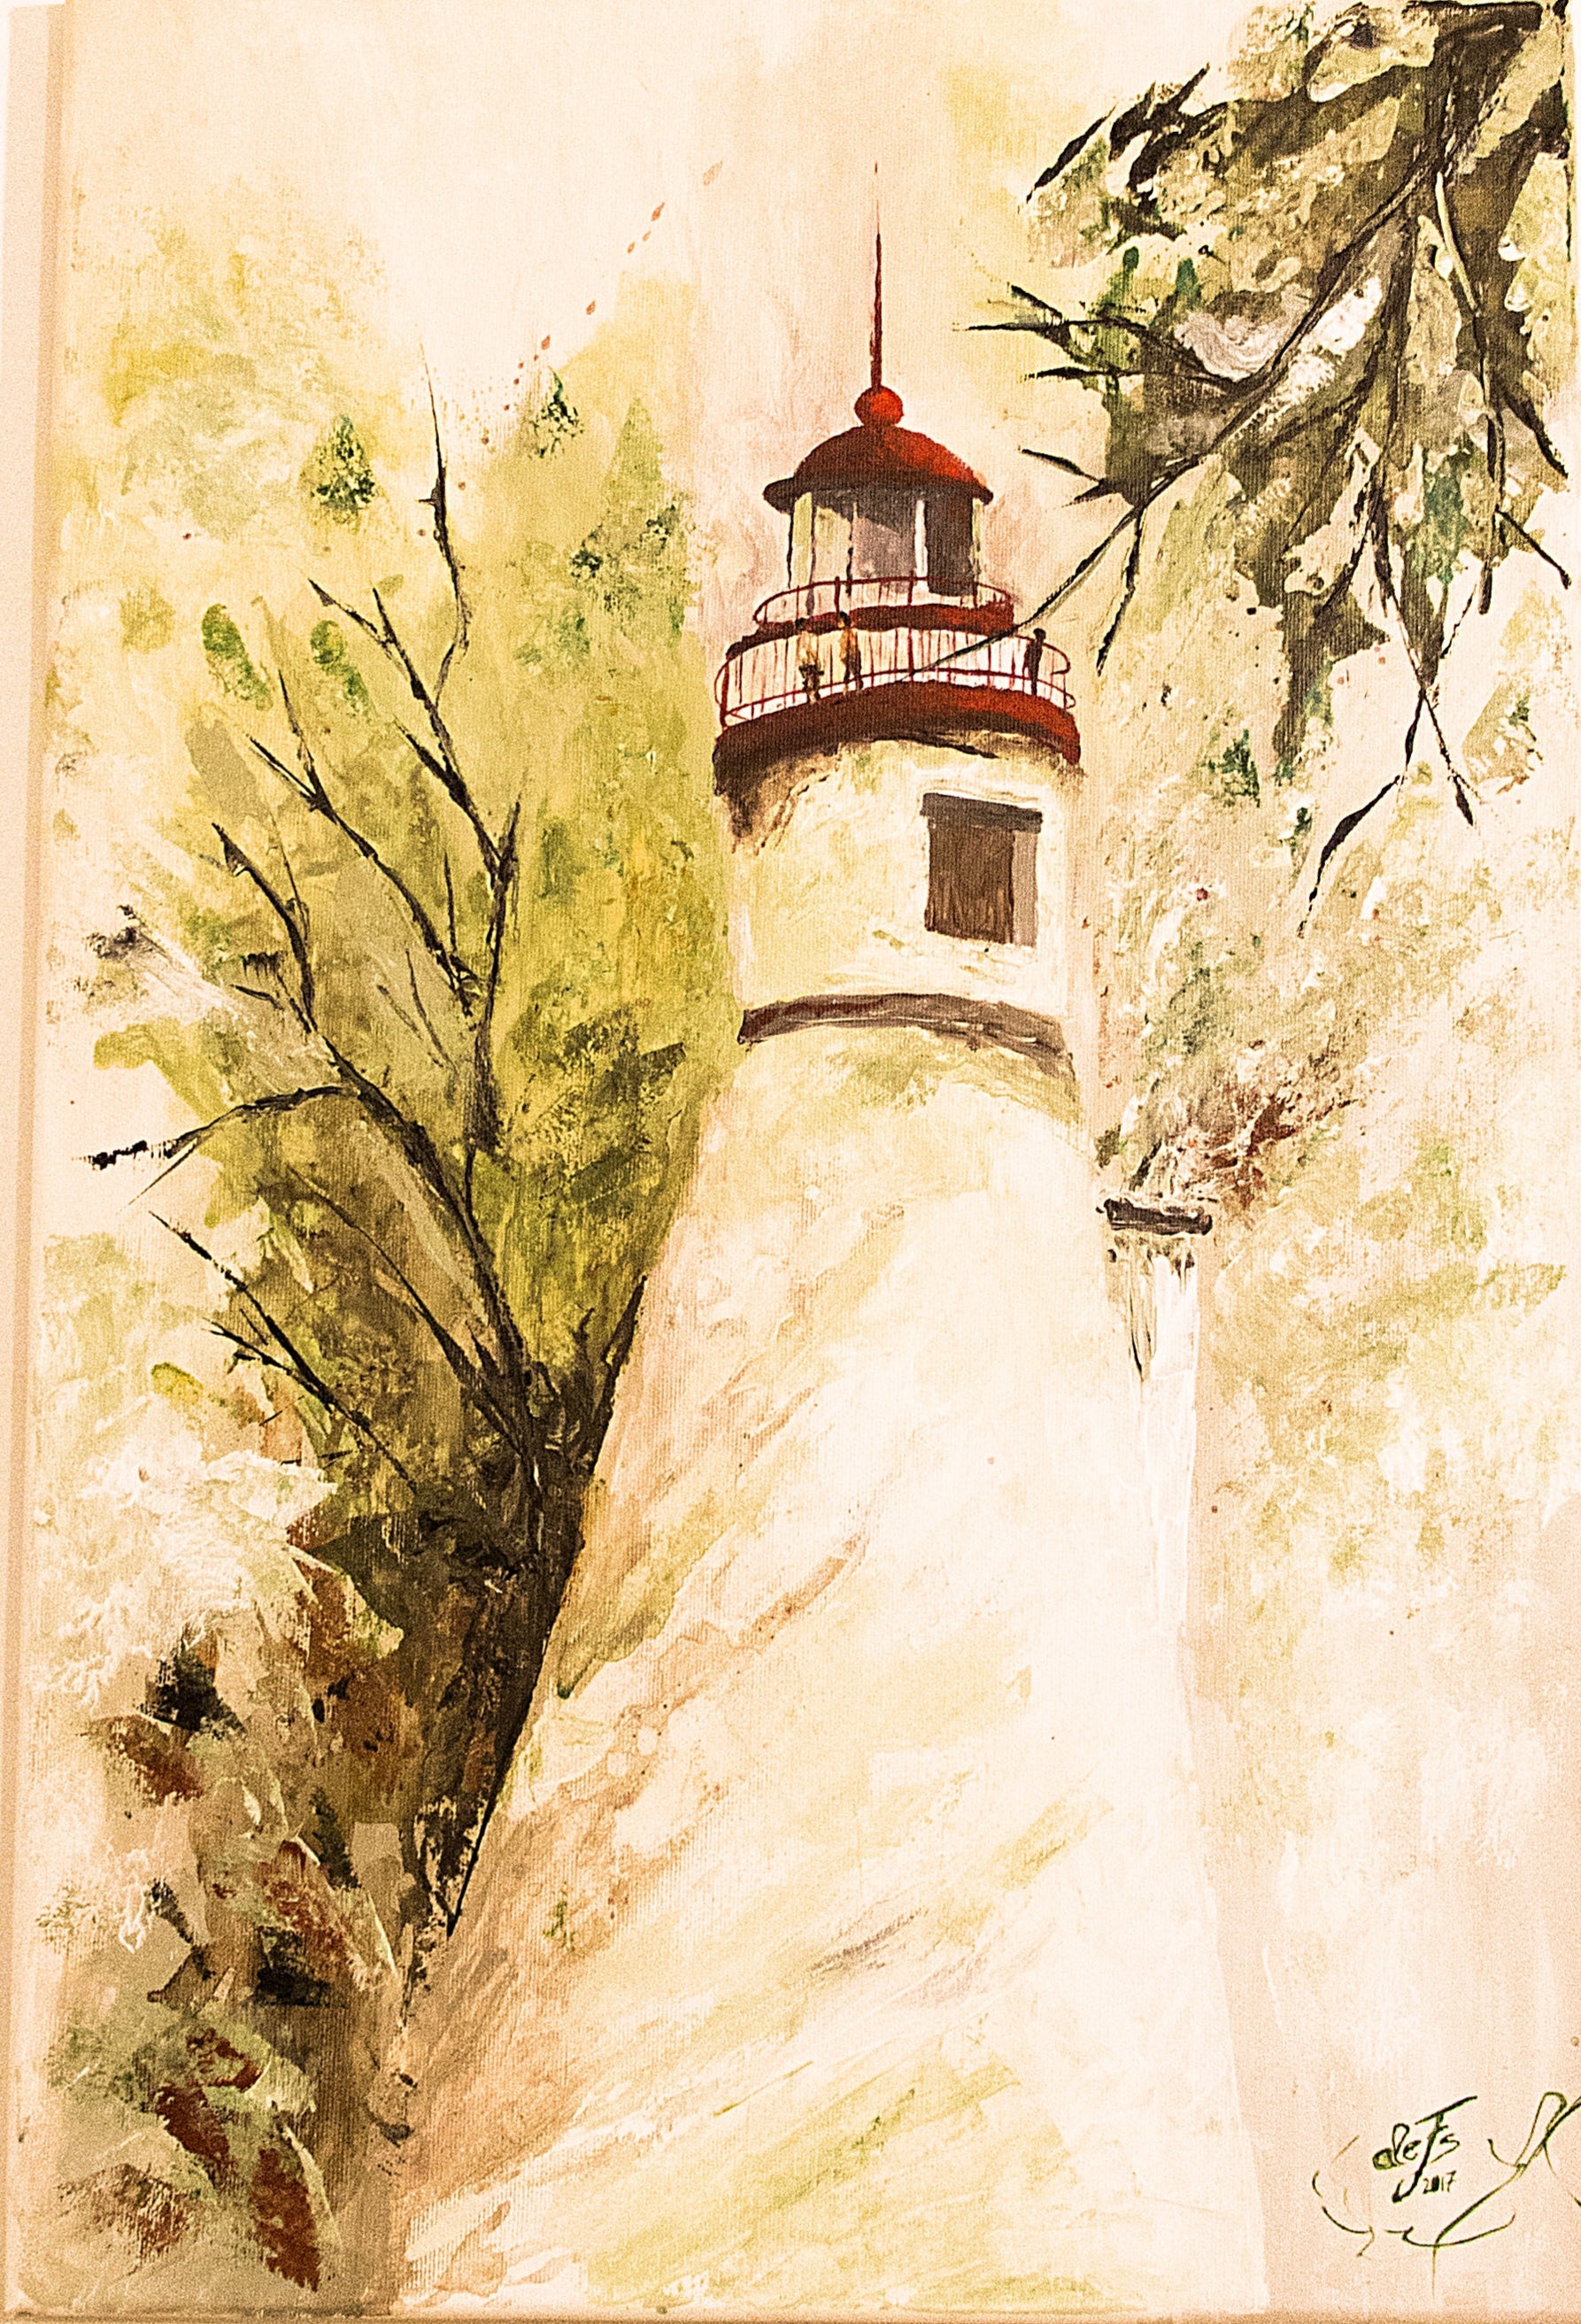 pictura acrilic, acrylic painting, pictura far, lighthouse painting, near the sea